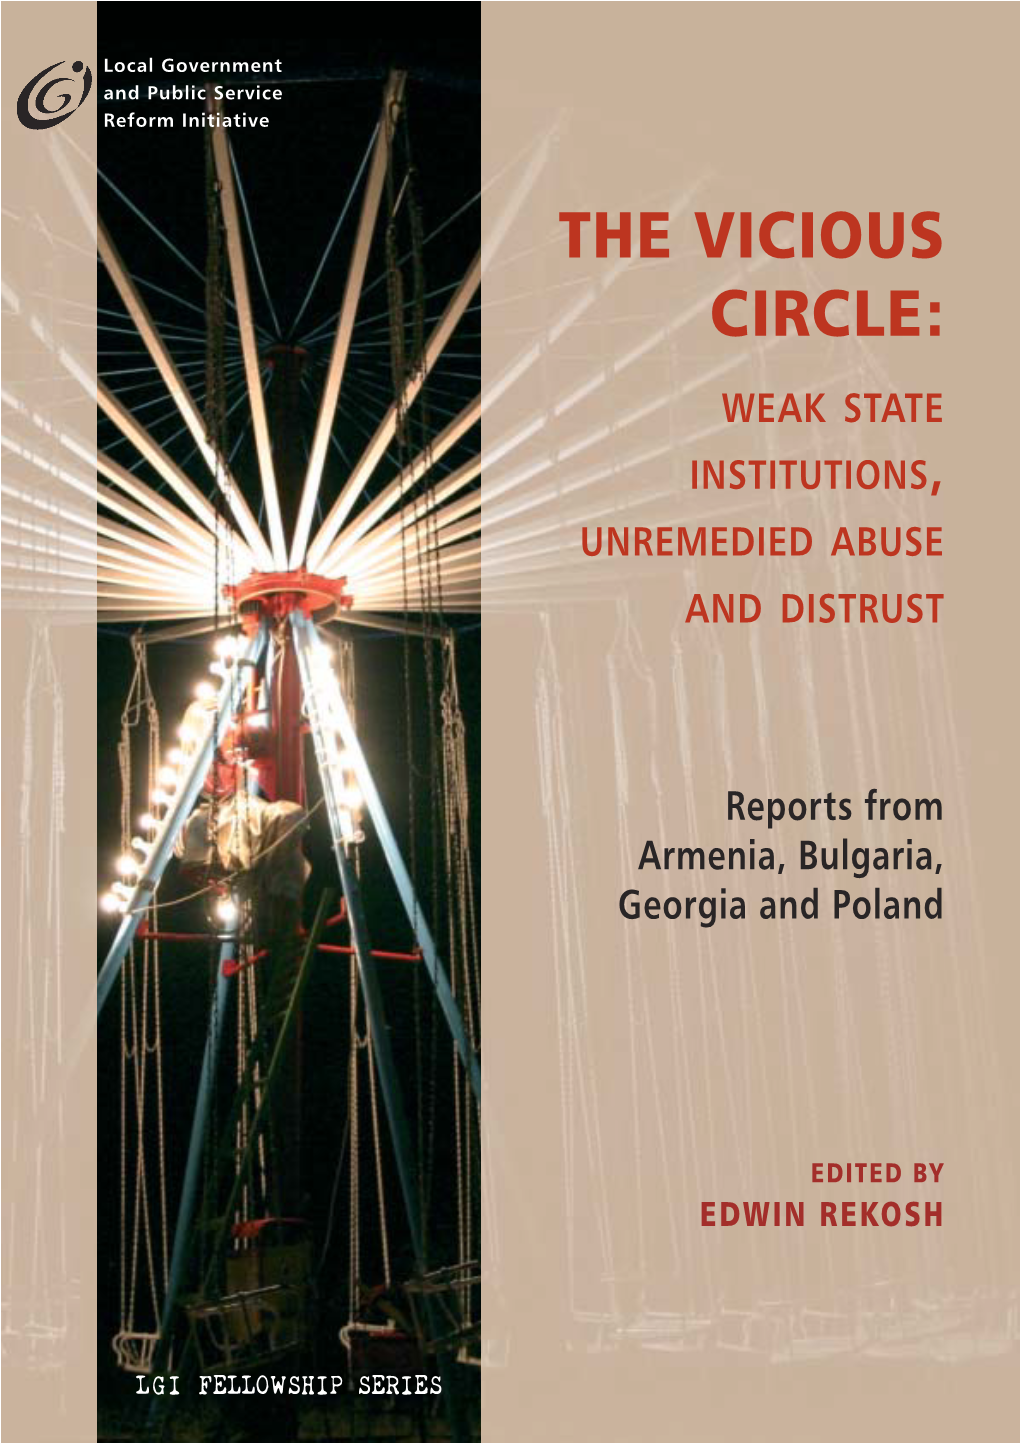 The Vicious Circle: Weak State Institutions, Unremedied Abuse and Distrust